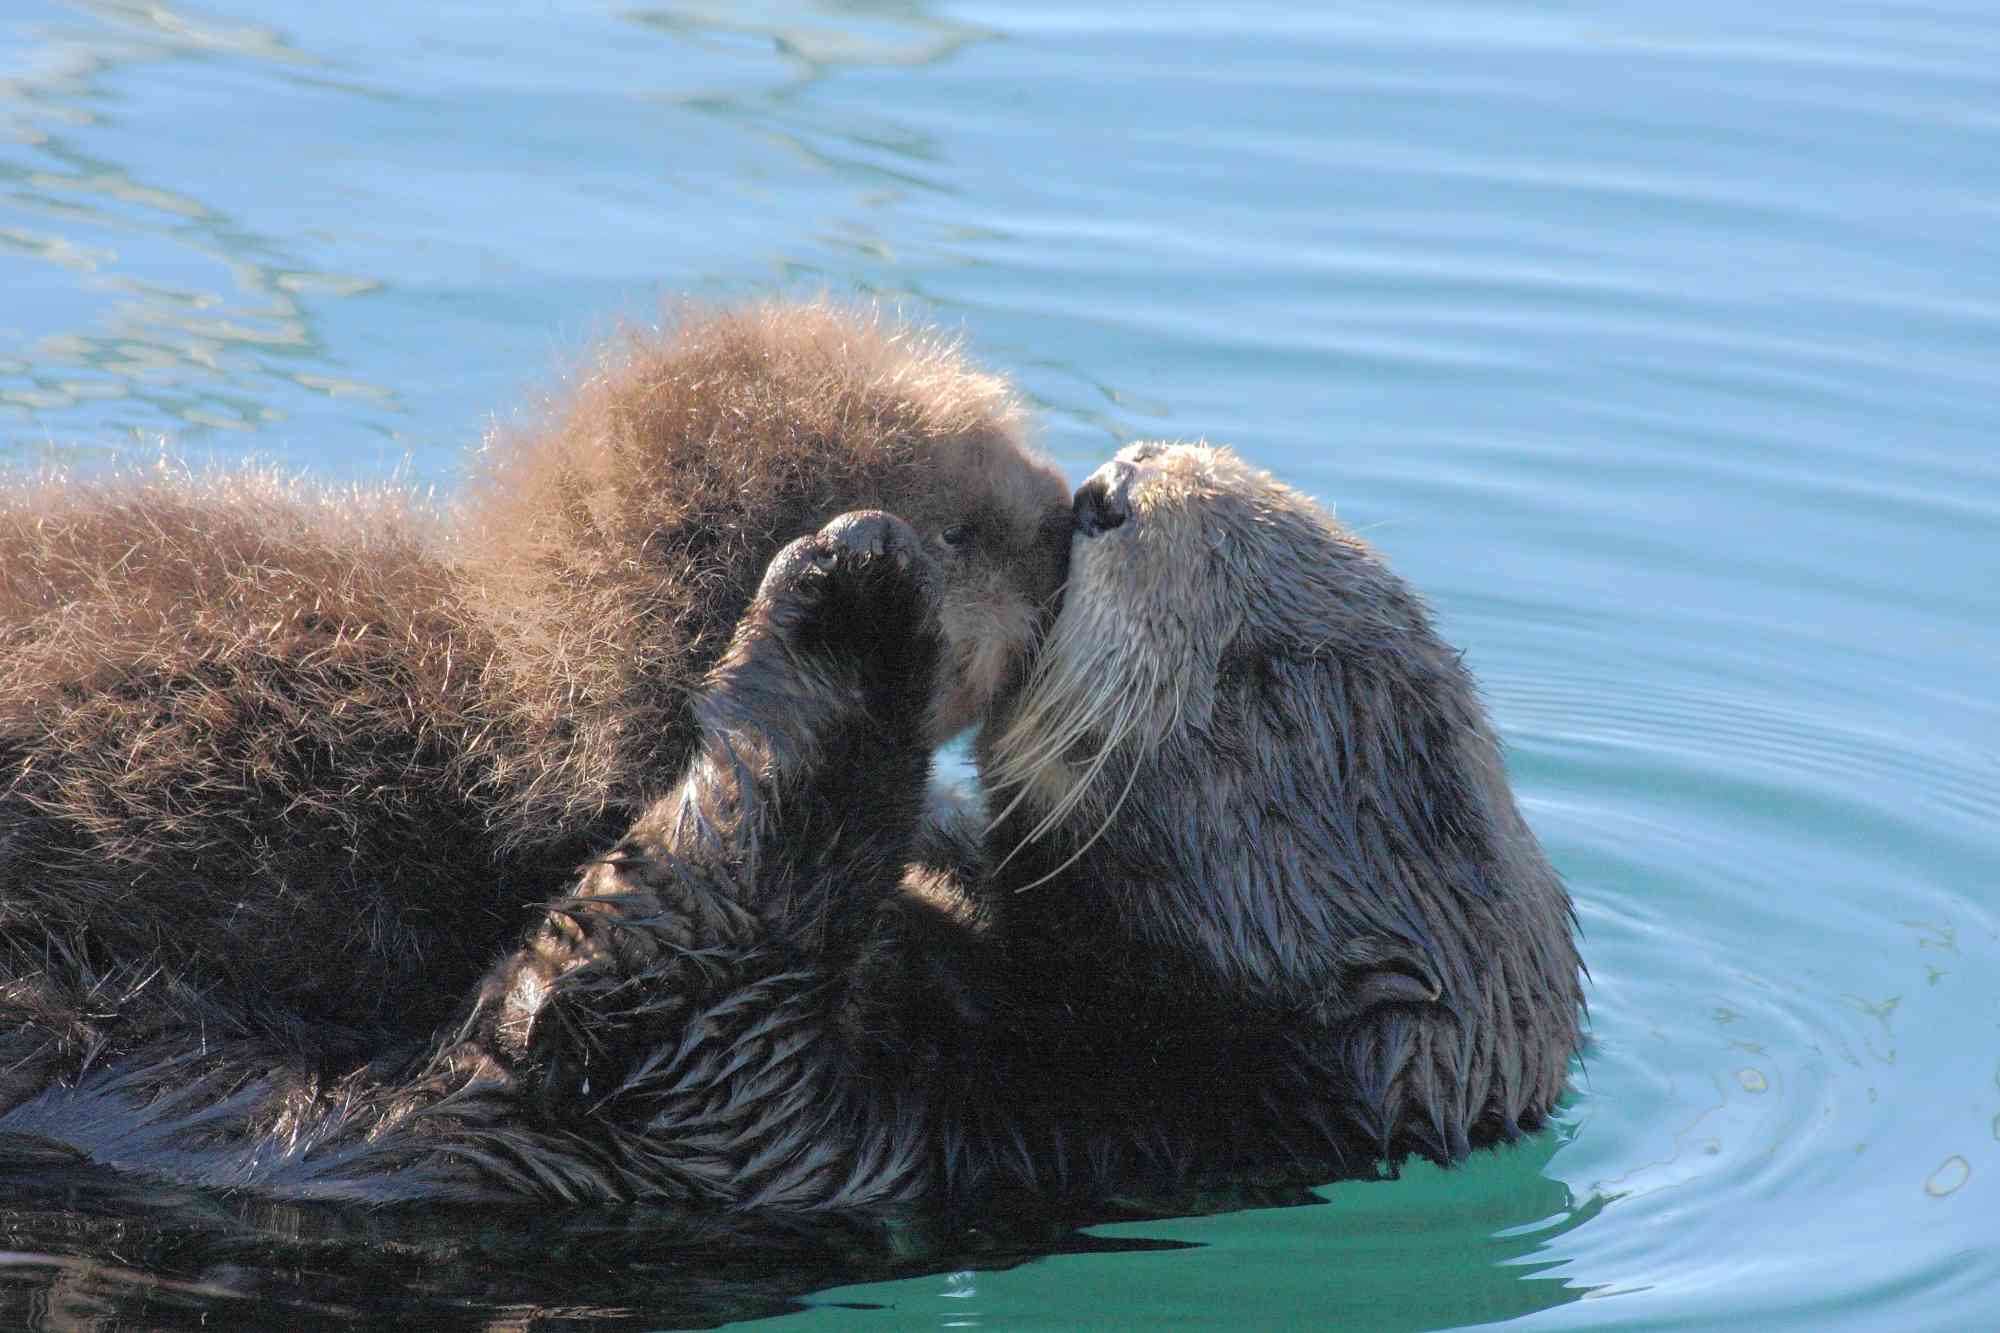 Sea otter mom and pup